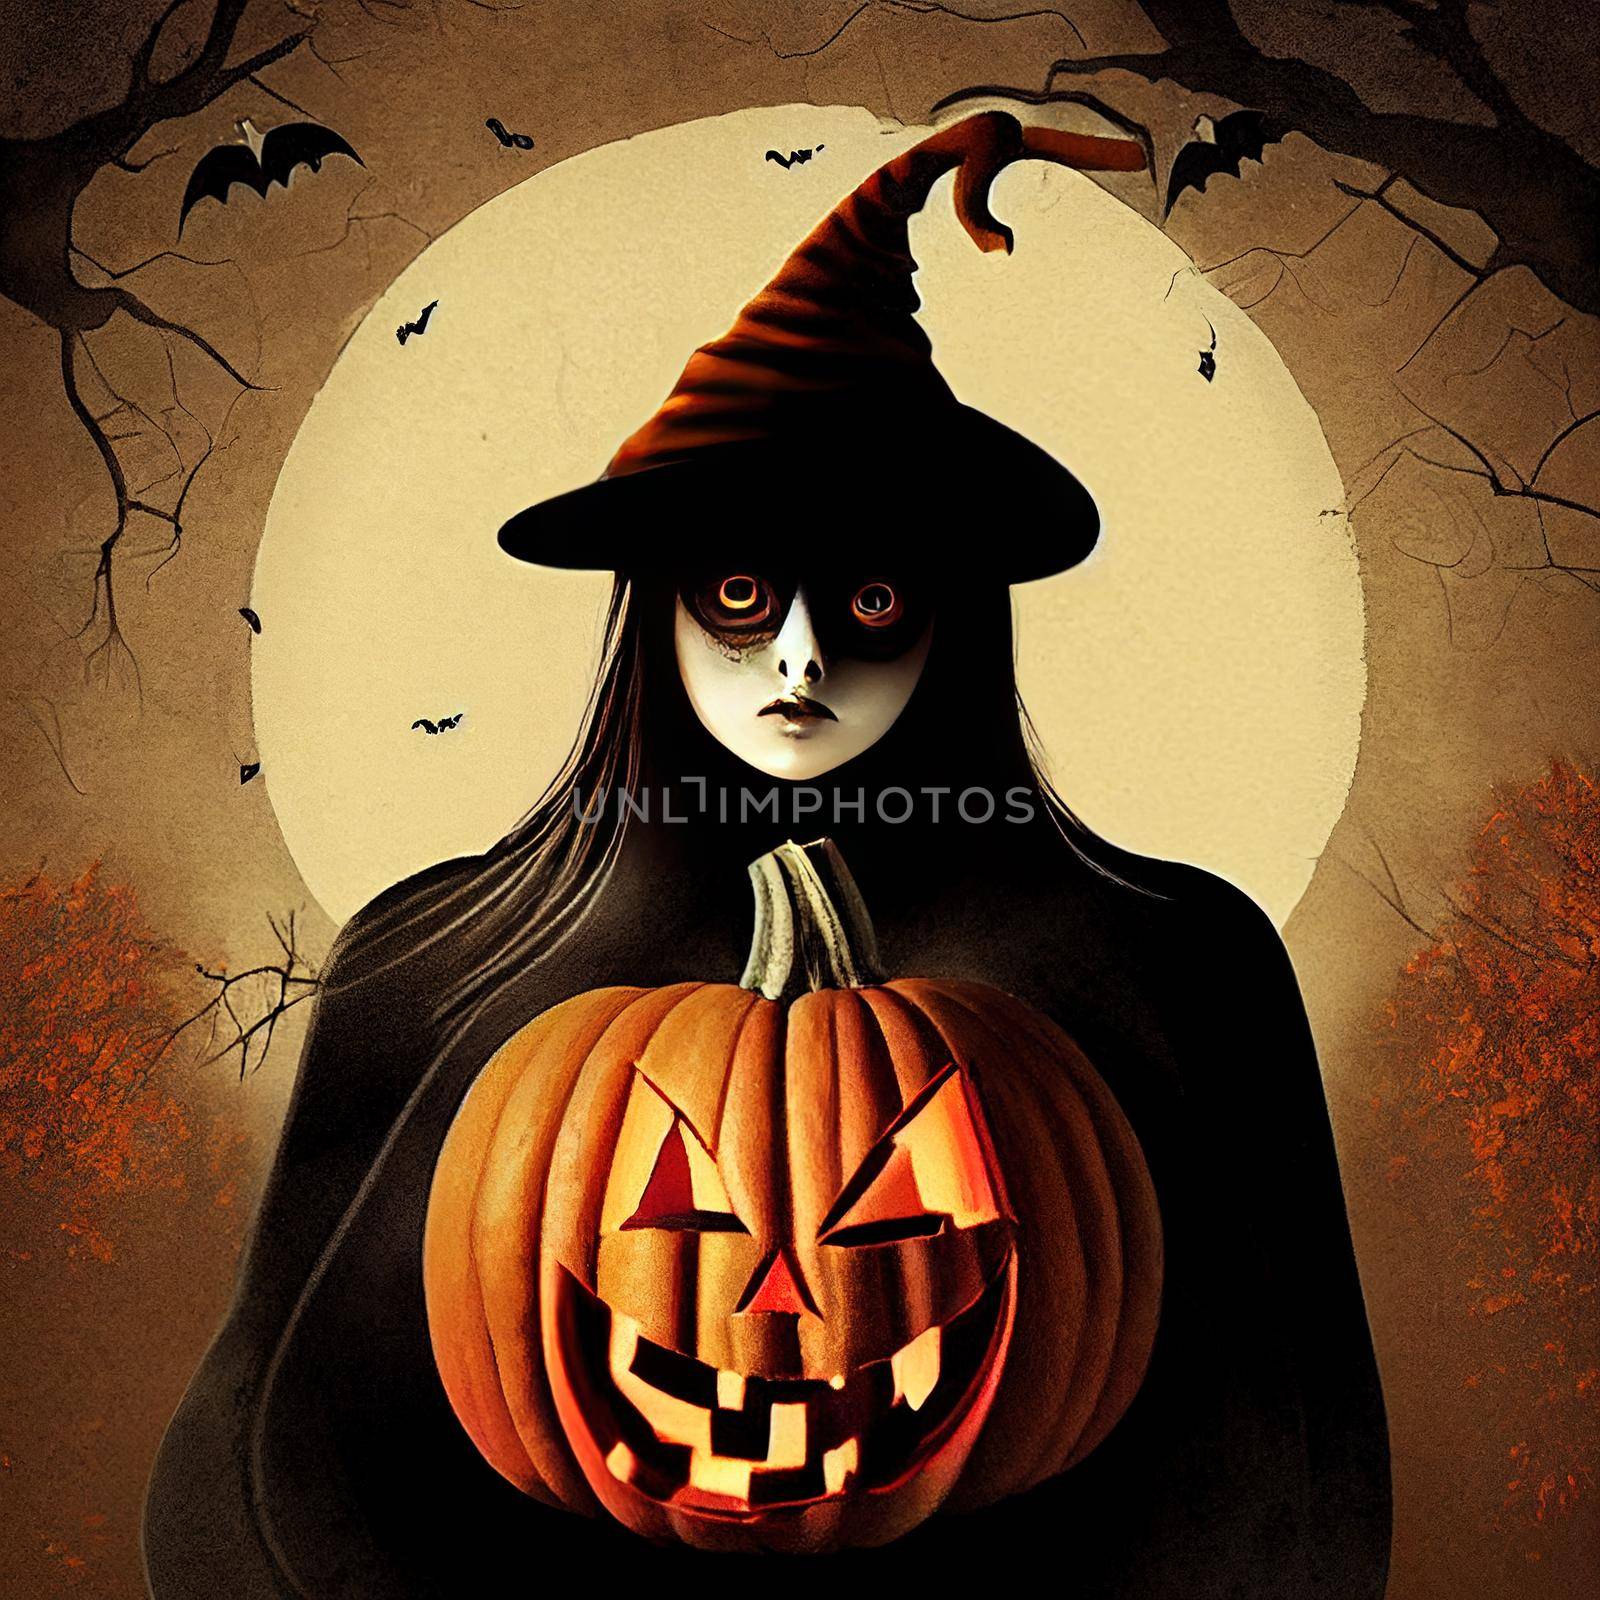 halloween witch orange pumpkin in hand, scary grungy style illustration. High quality 3d illustration